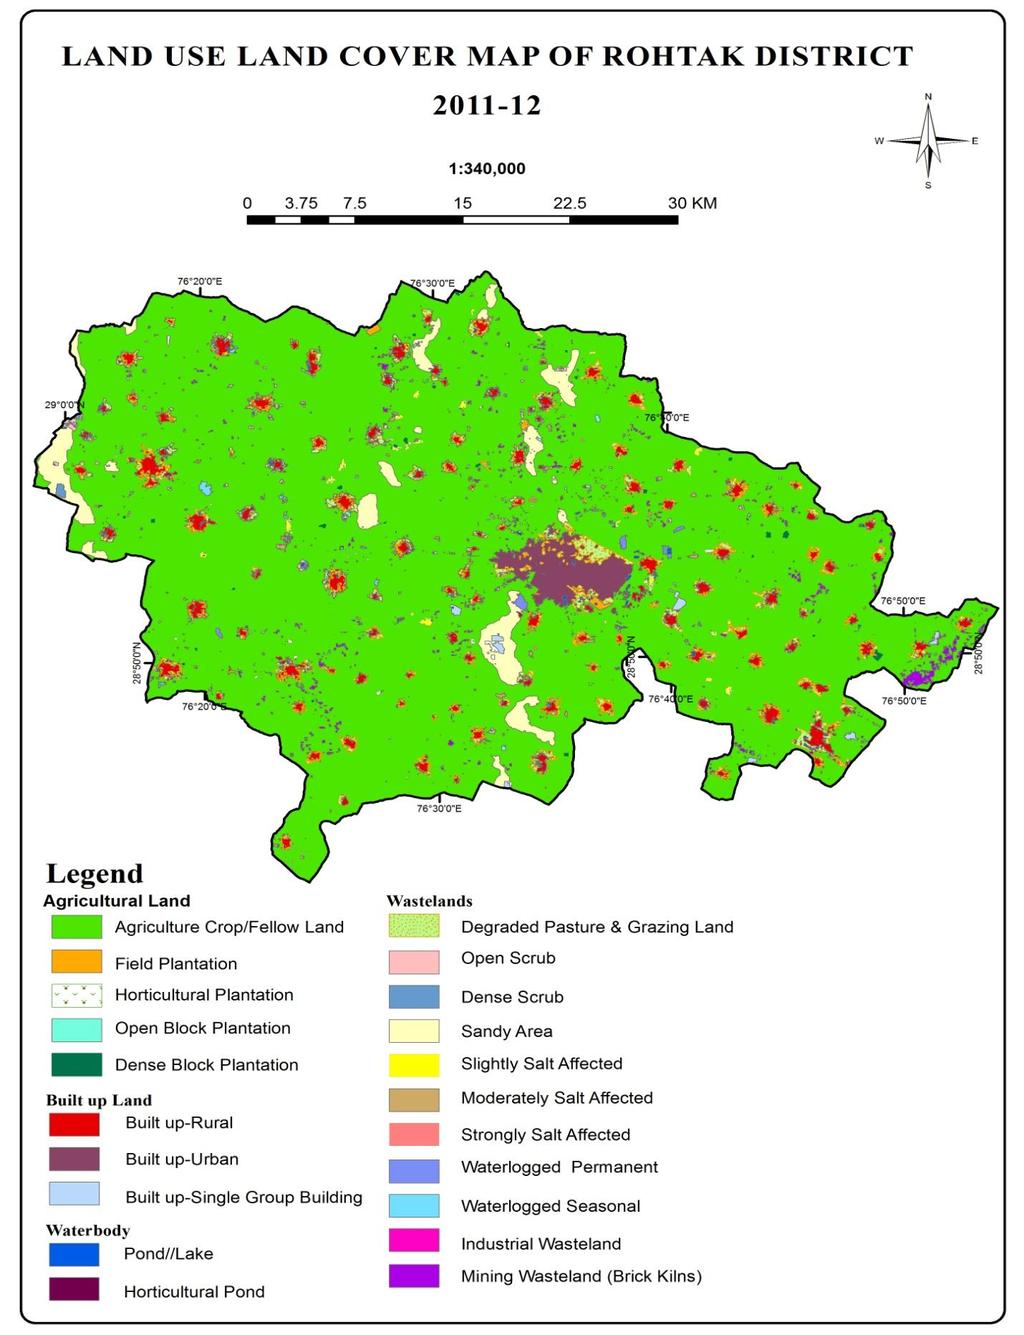 Figure:- 7 Pinnacle Research Journals 128 Conclusion The present paper was conducted for Land use/ Land cover mapping of Rohtak district using eight band World View-2 satellite data of